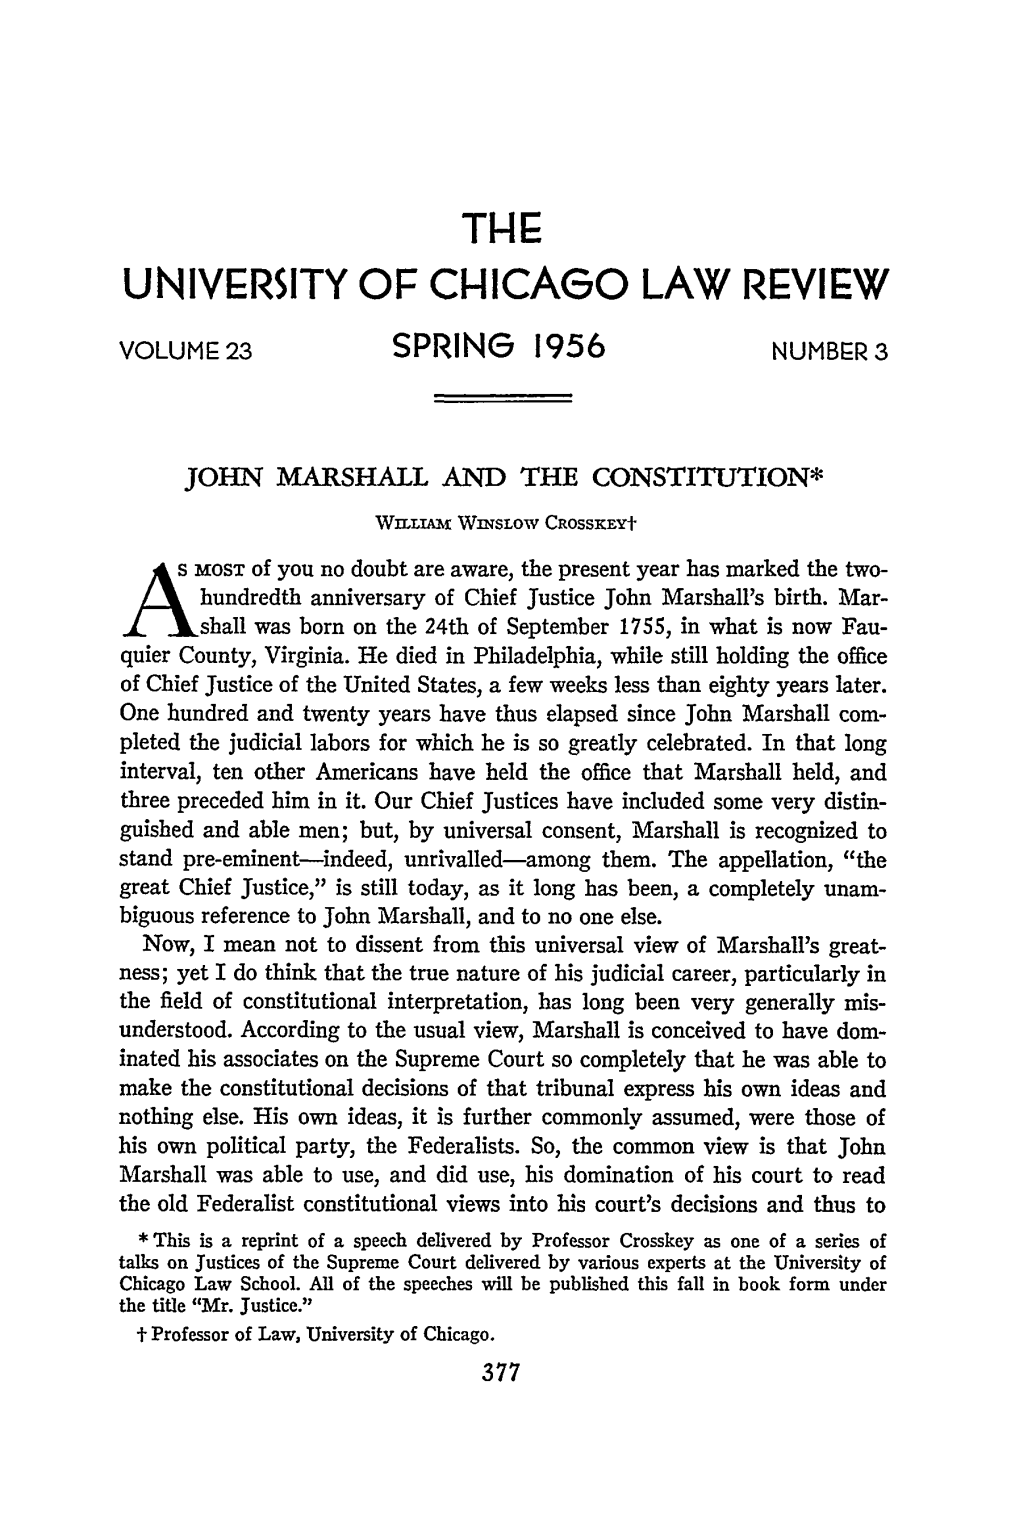 John Marshall and the Constitution*